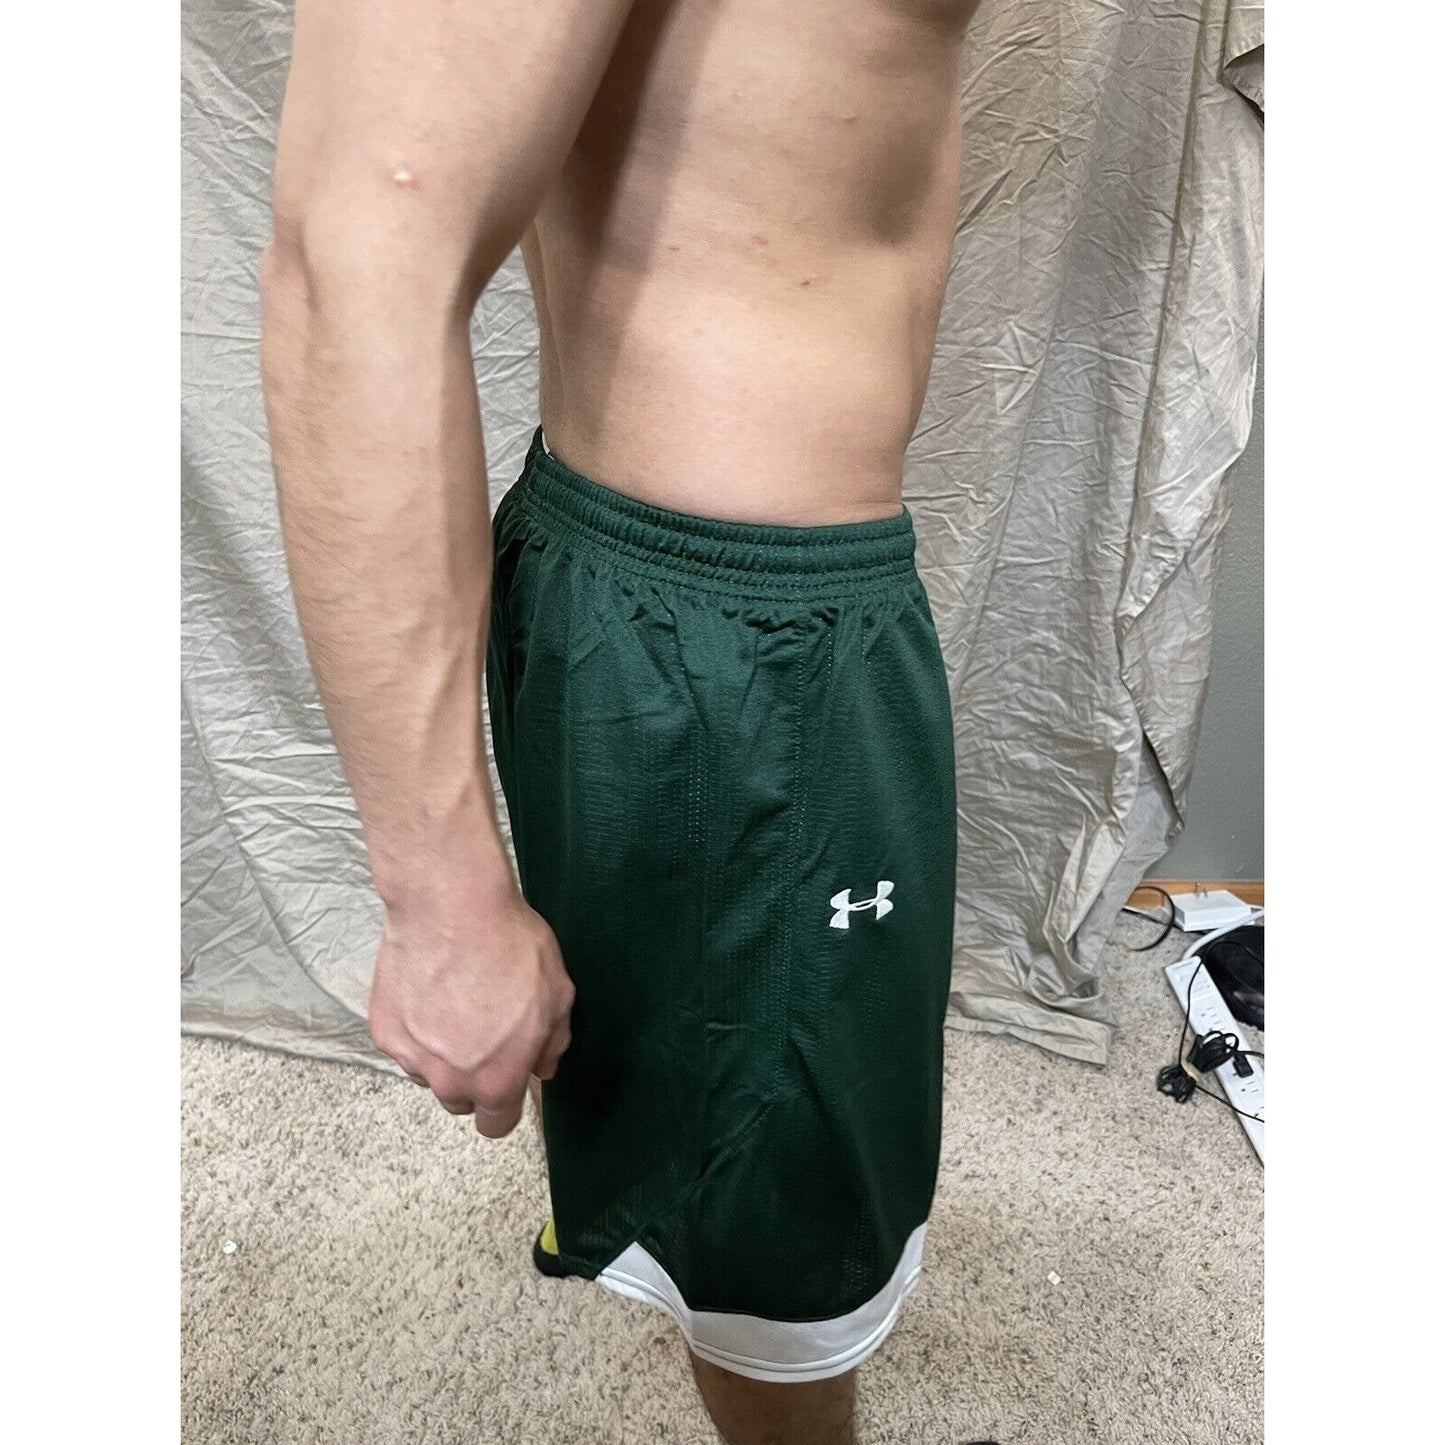 Boy's under armour Youth XL Deep Green Lacrosse style shorts no pockets